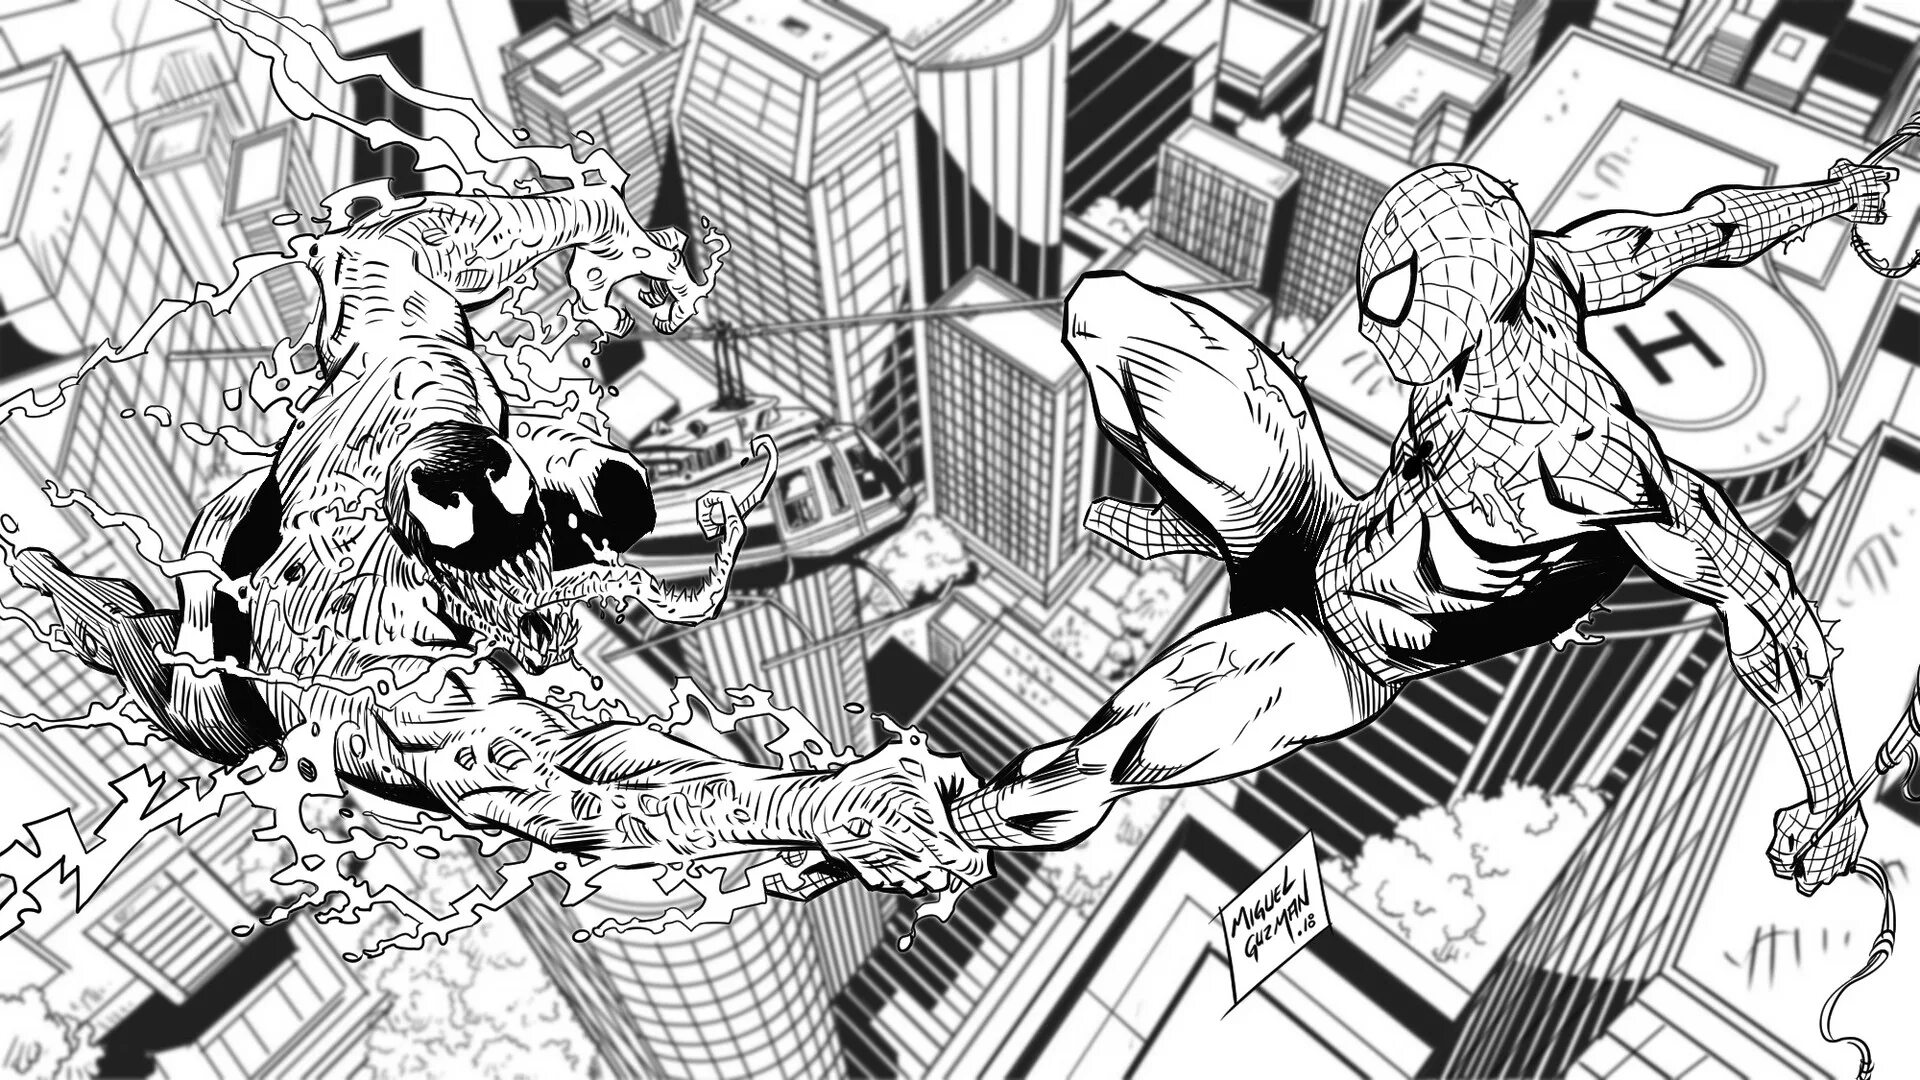 Spiderman's exciting coloring page